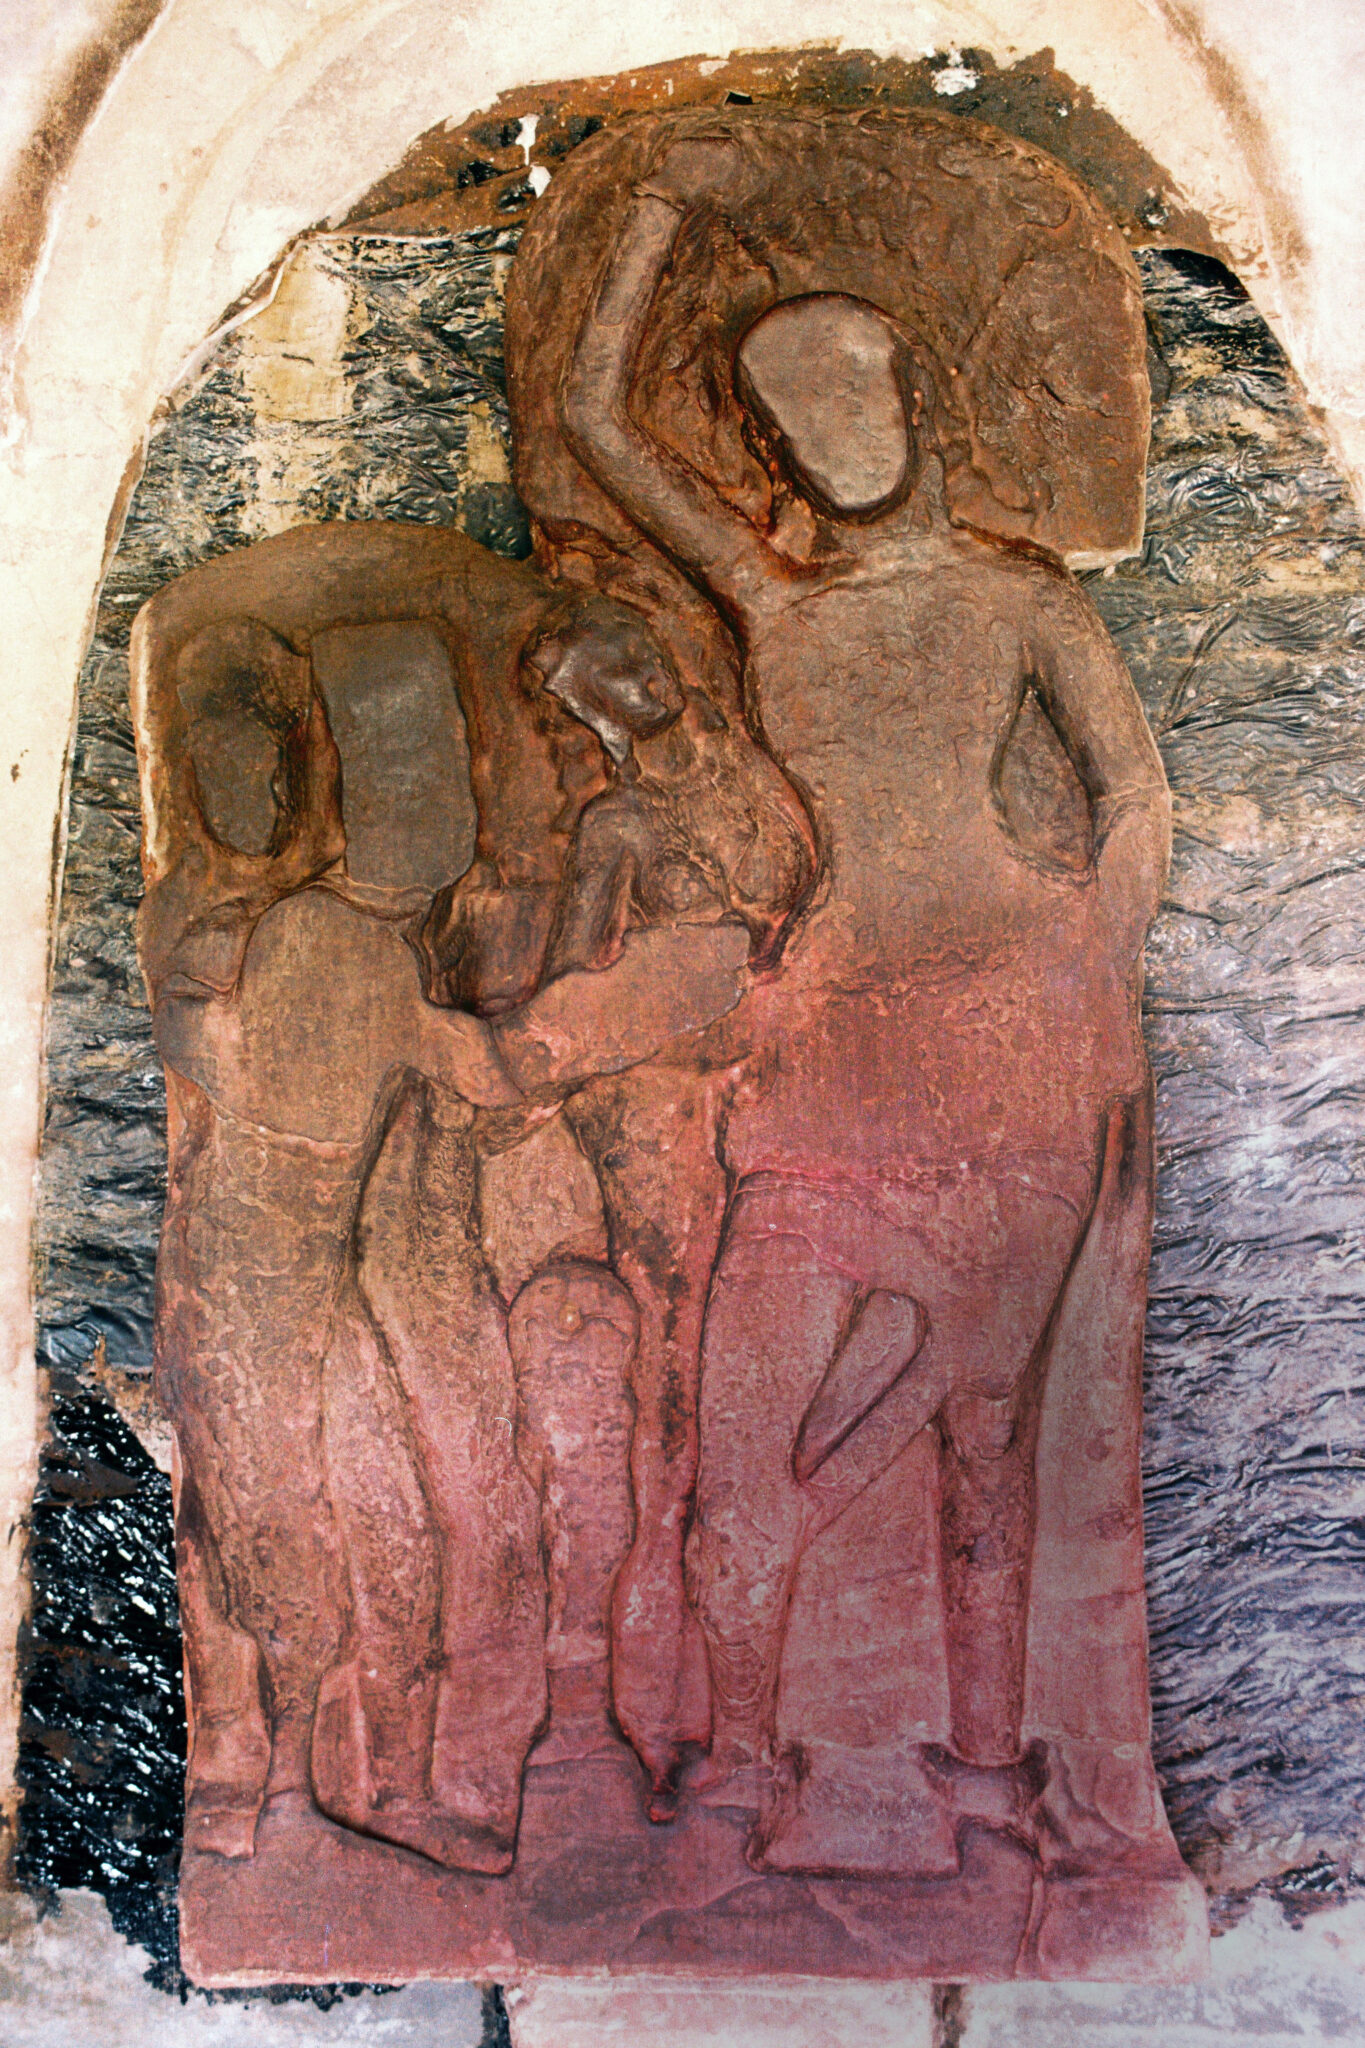 Brown-red relief against stone wall of featureless figure, arm raised, standing next to three smaller figures